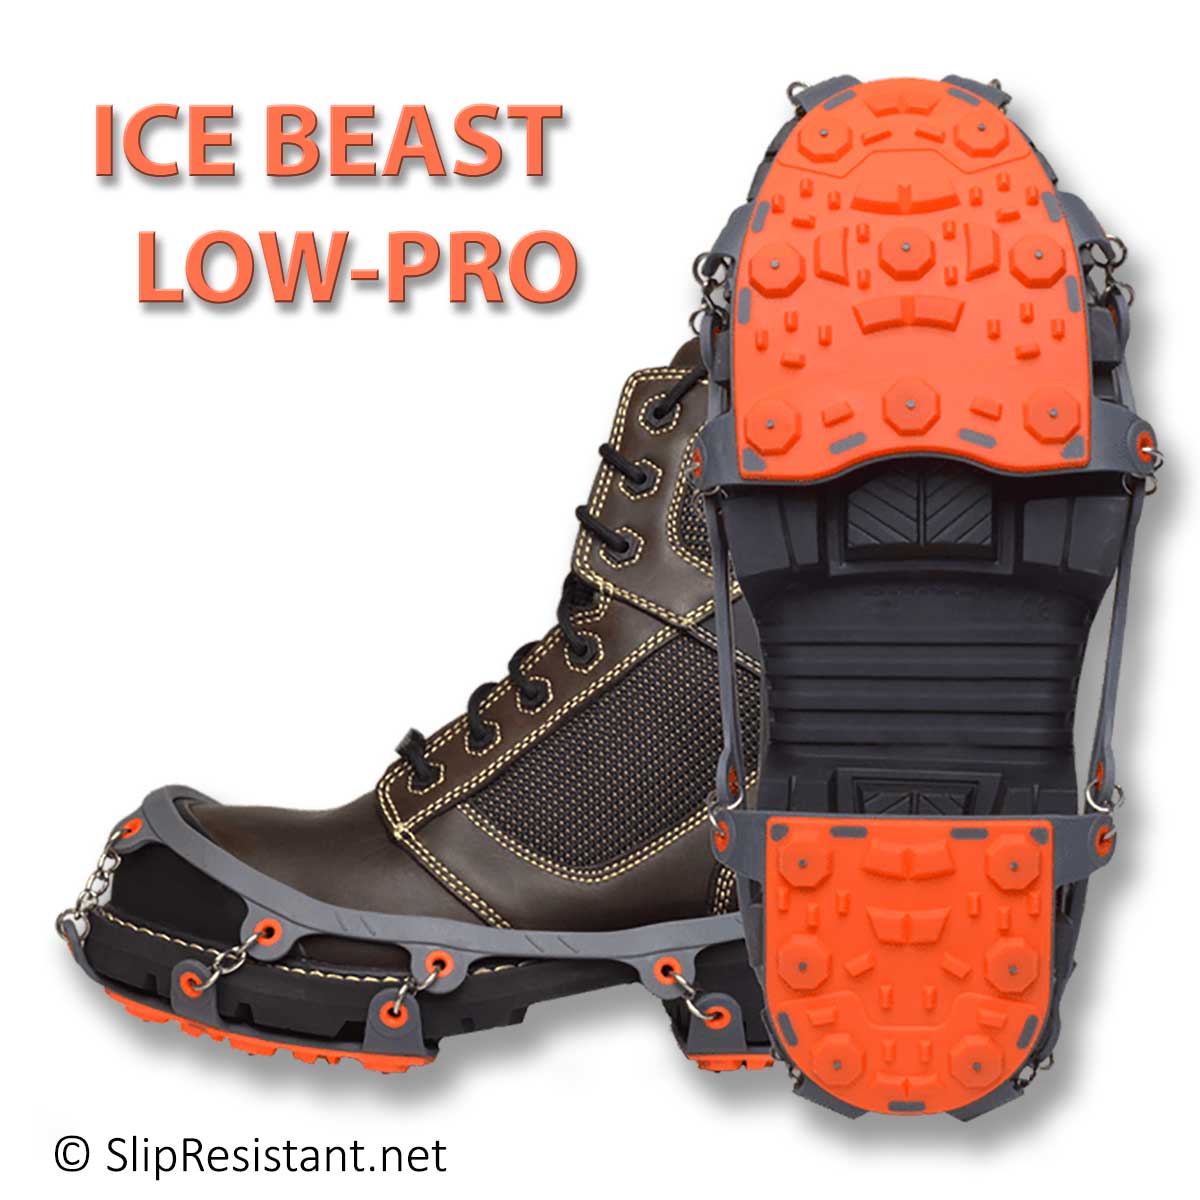 ICE BEAST LOW-PRO Ice Cleats for policemen with large boots and want to wear ice cleats indoors.